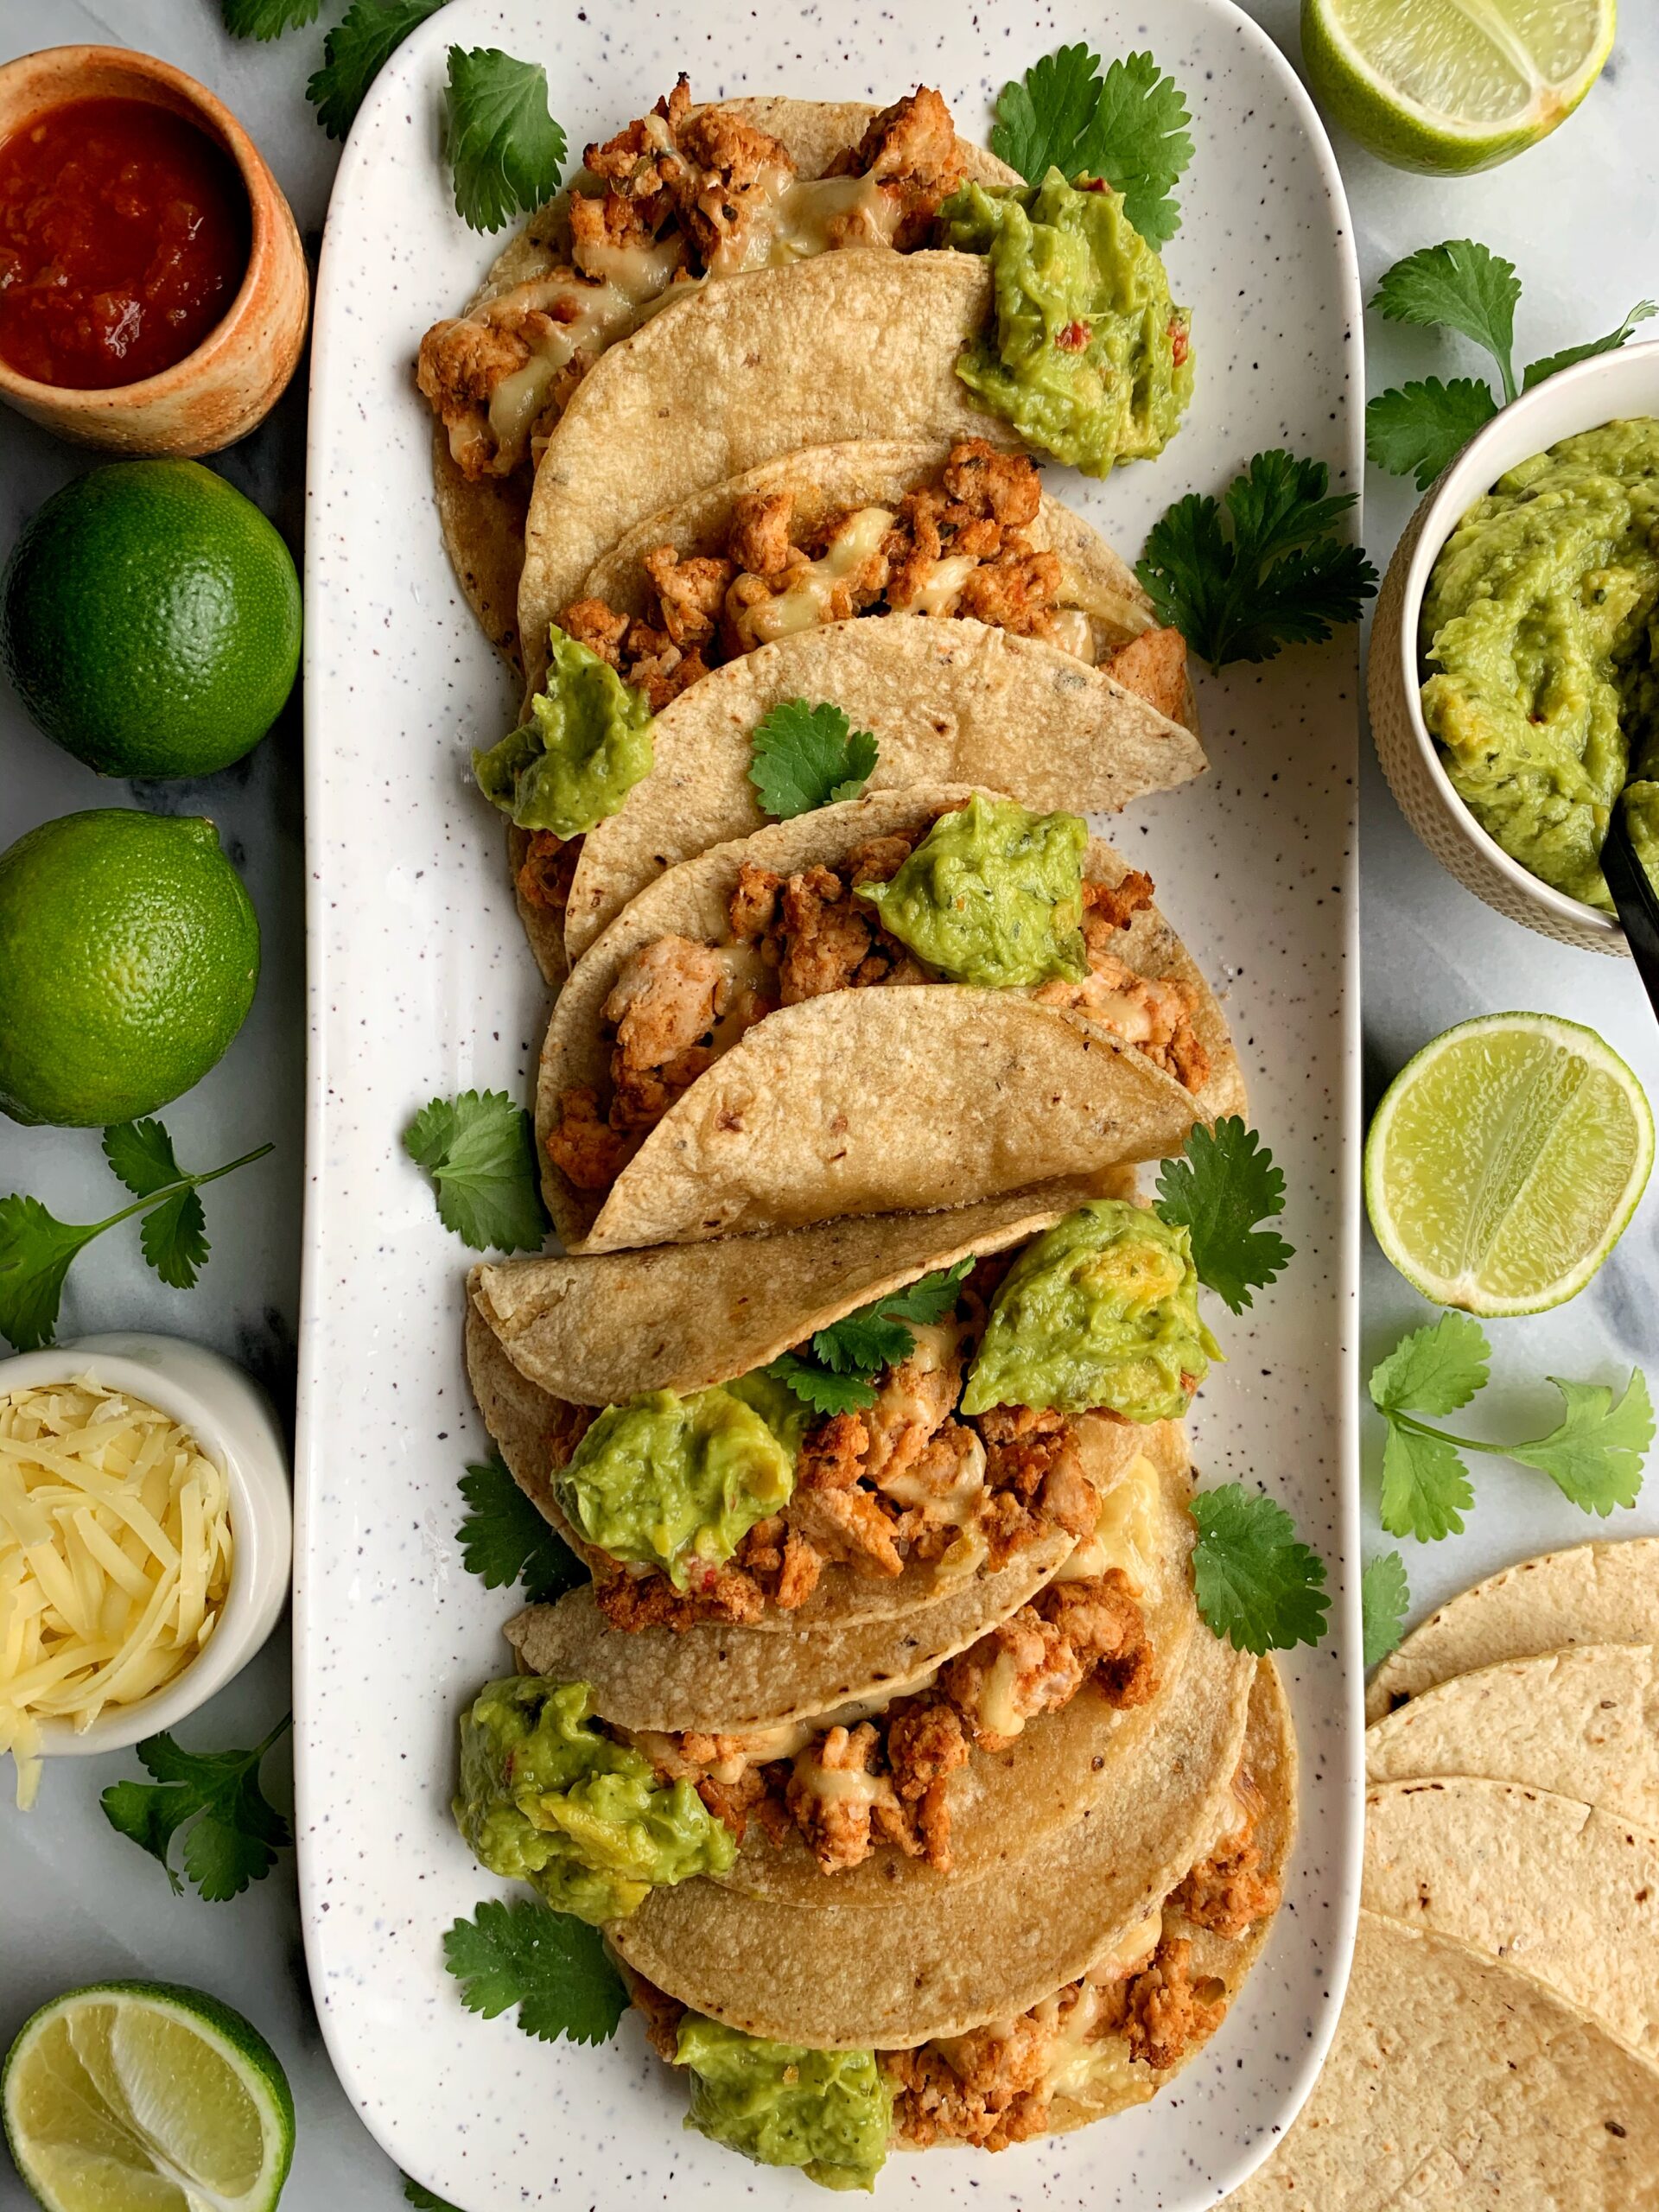 The Best Ever Healthy Chipotle Tacos! - rachLmansfield